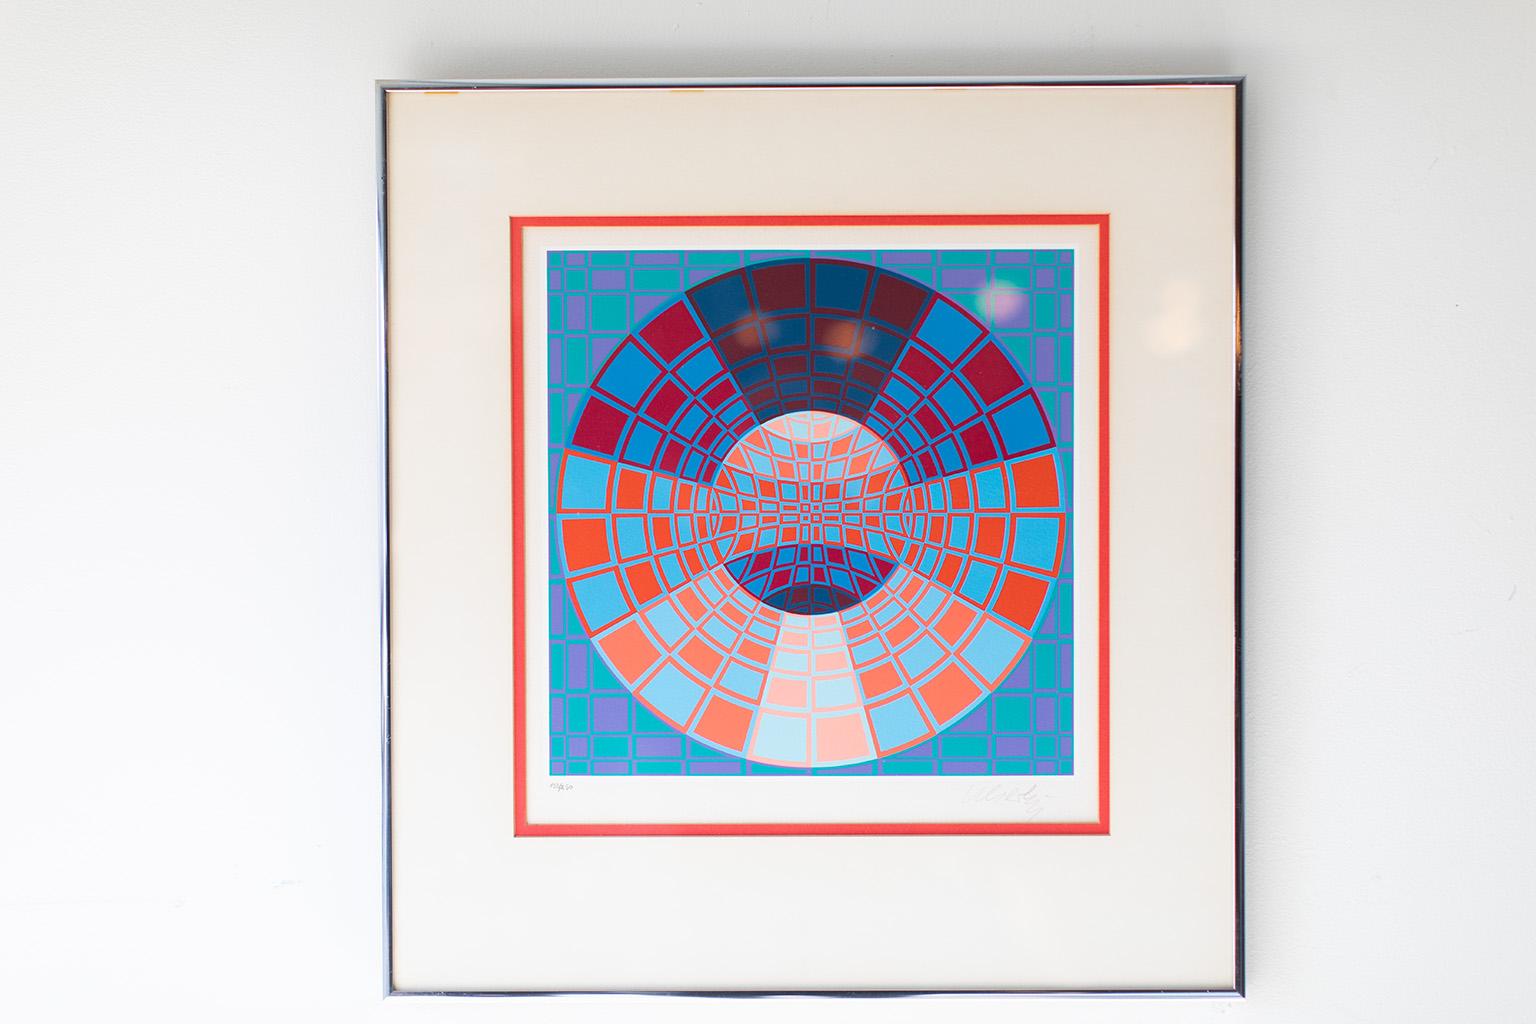 Artist: Victor Vasarely

Medium: Lithograph
Movement/Style: Modern
Signed and Numbered : 133/250


Condition:

This Victor Vasaerly lithograph is in very good vintage condition. The art is vibrant and without damage. It looks to have its